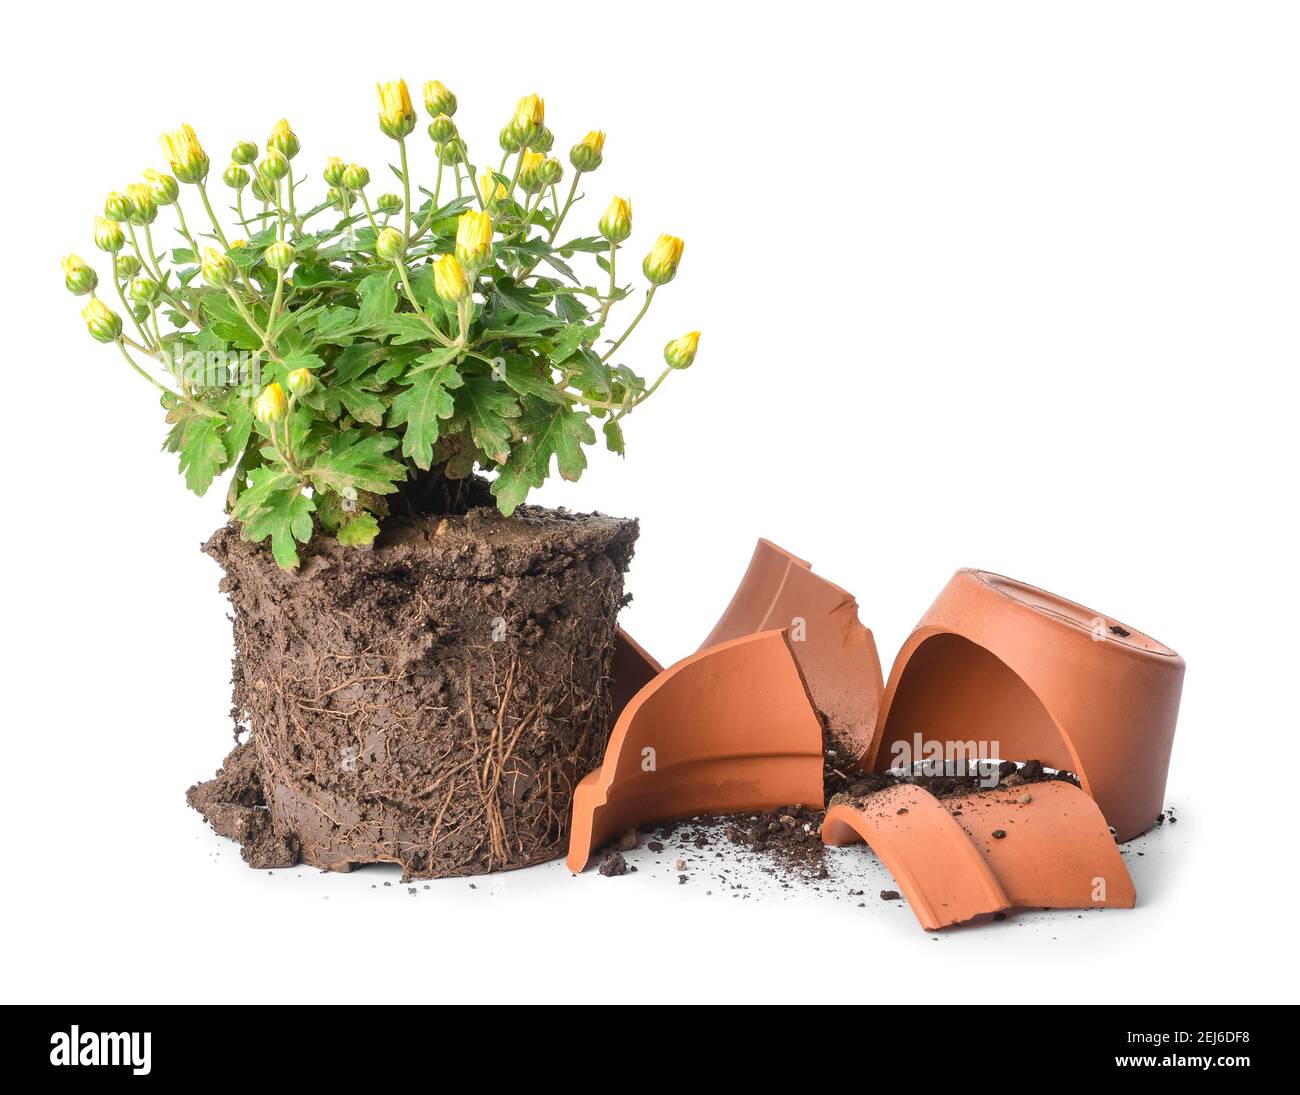 Broken flower pot with plant Cut Out Stock Images & Pictures - Alamy